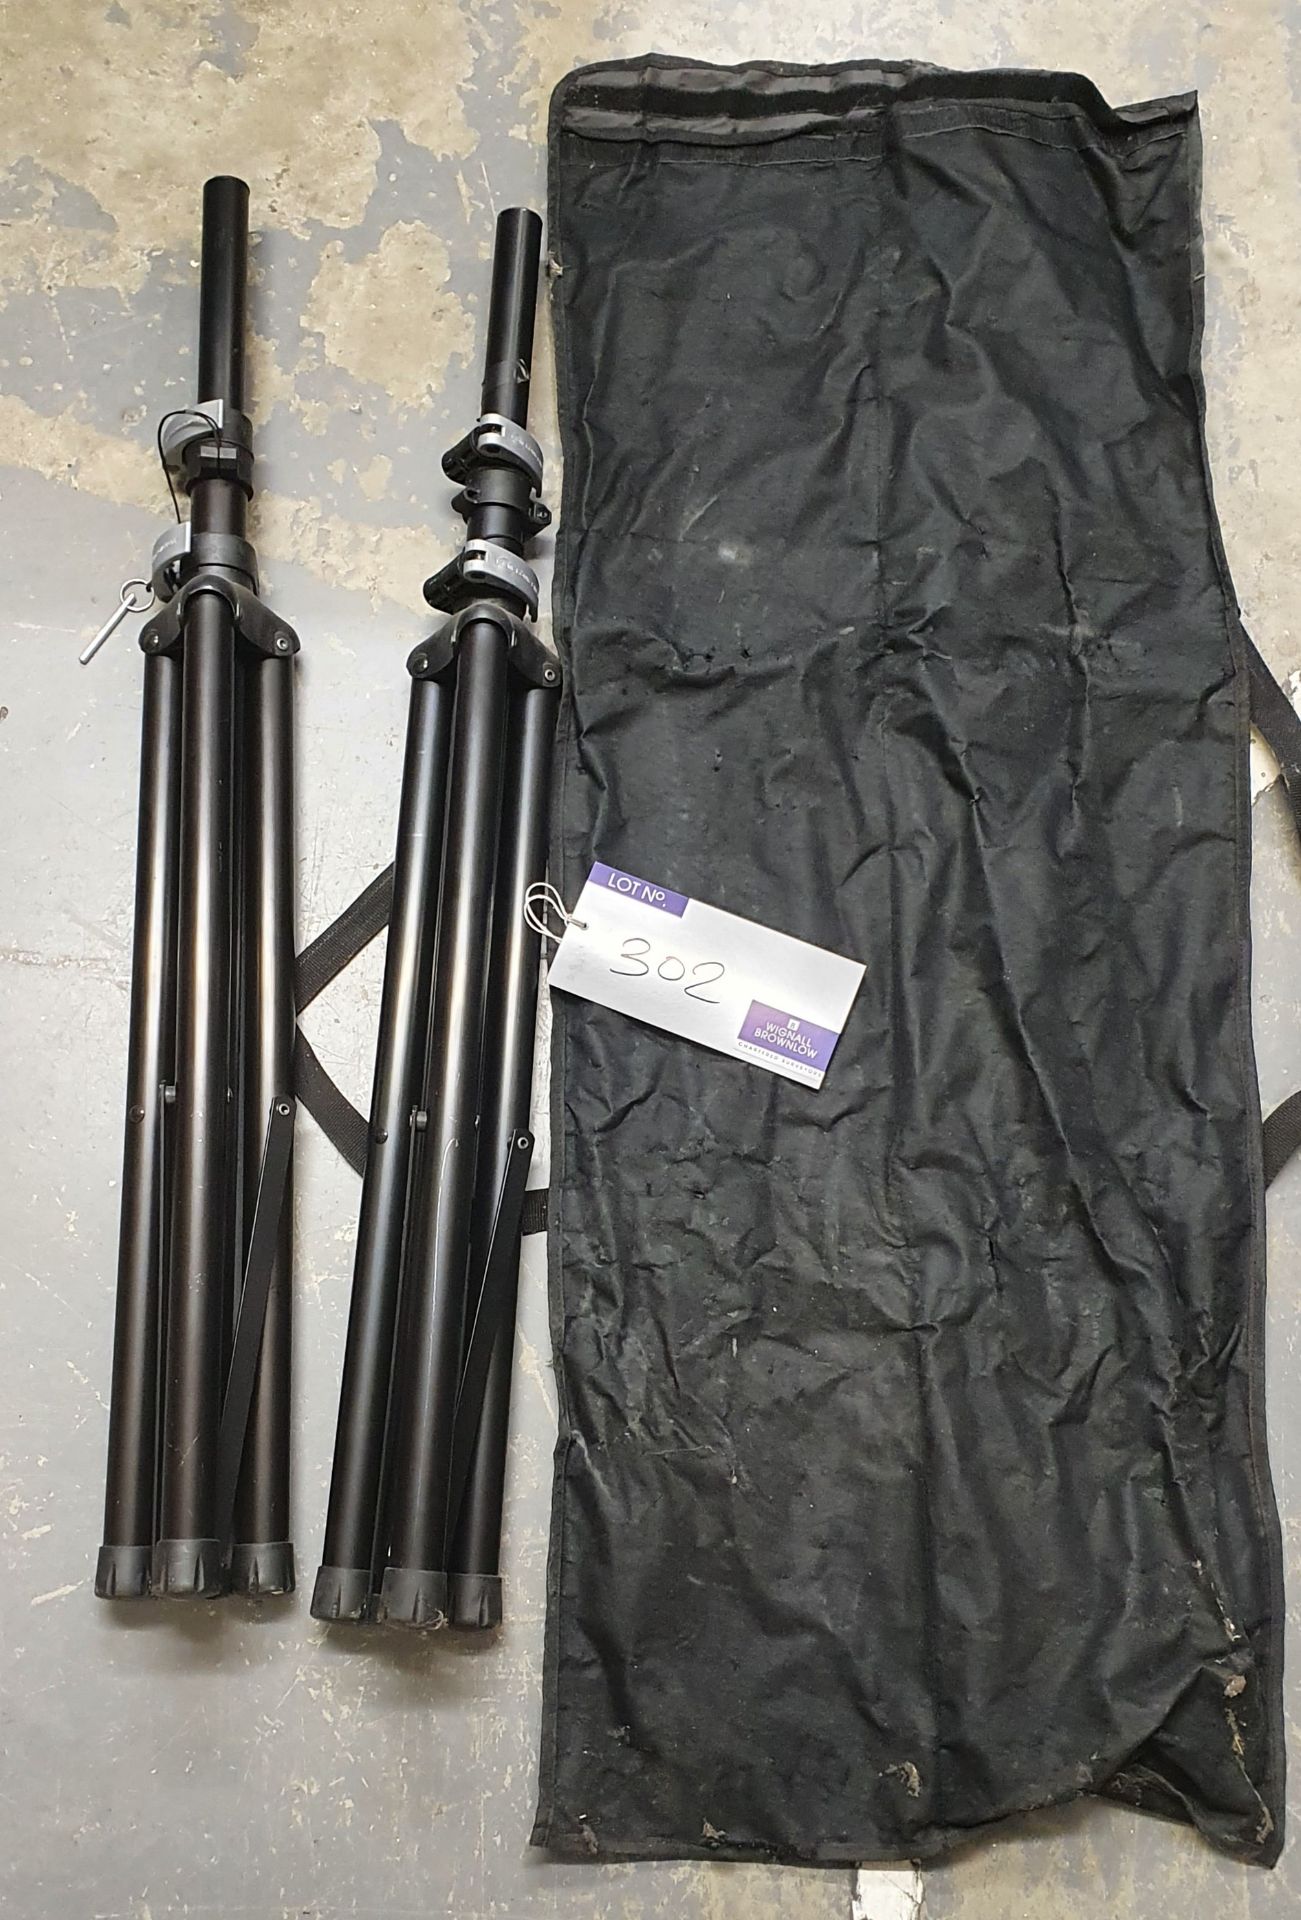 A pair of Black Tripod Speaker Stands with carry bag.